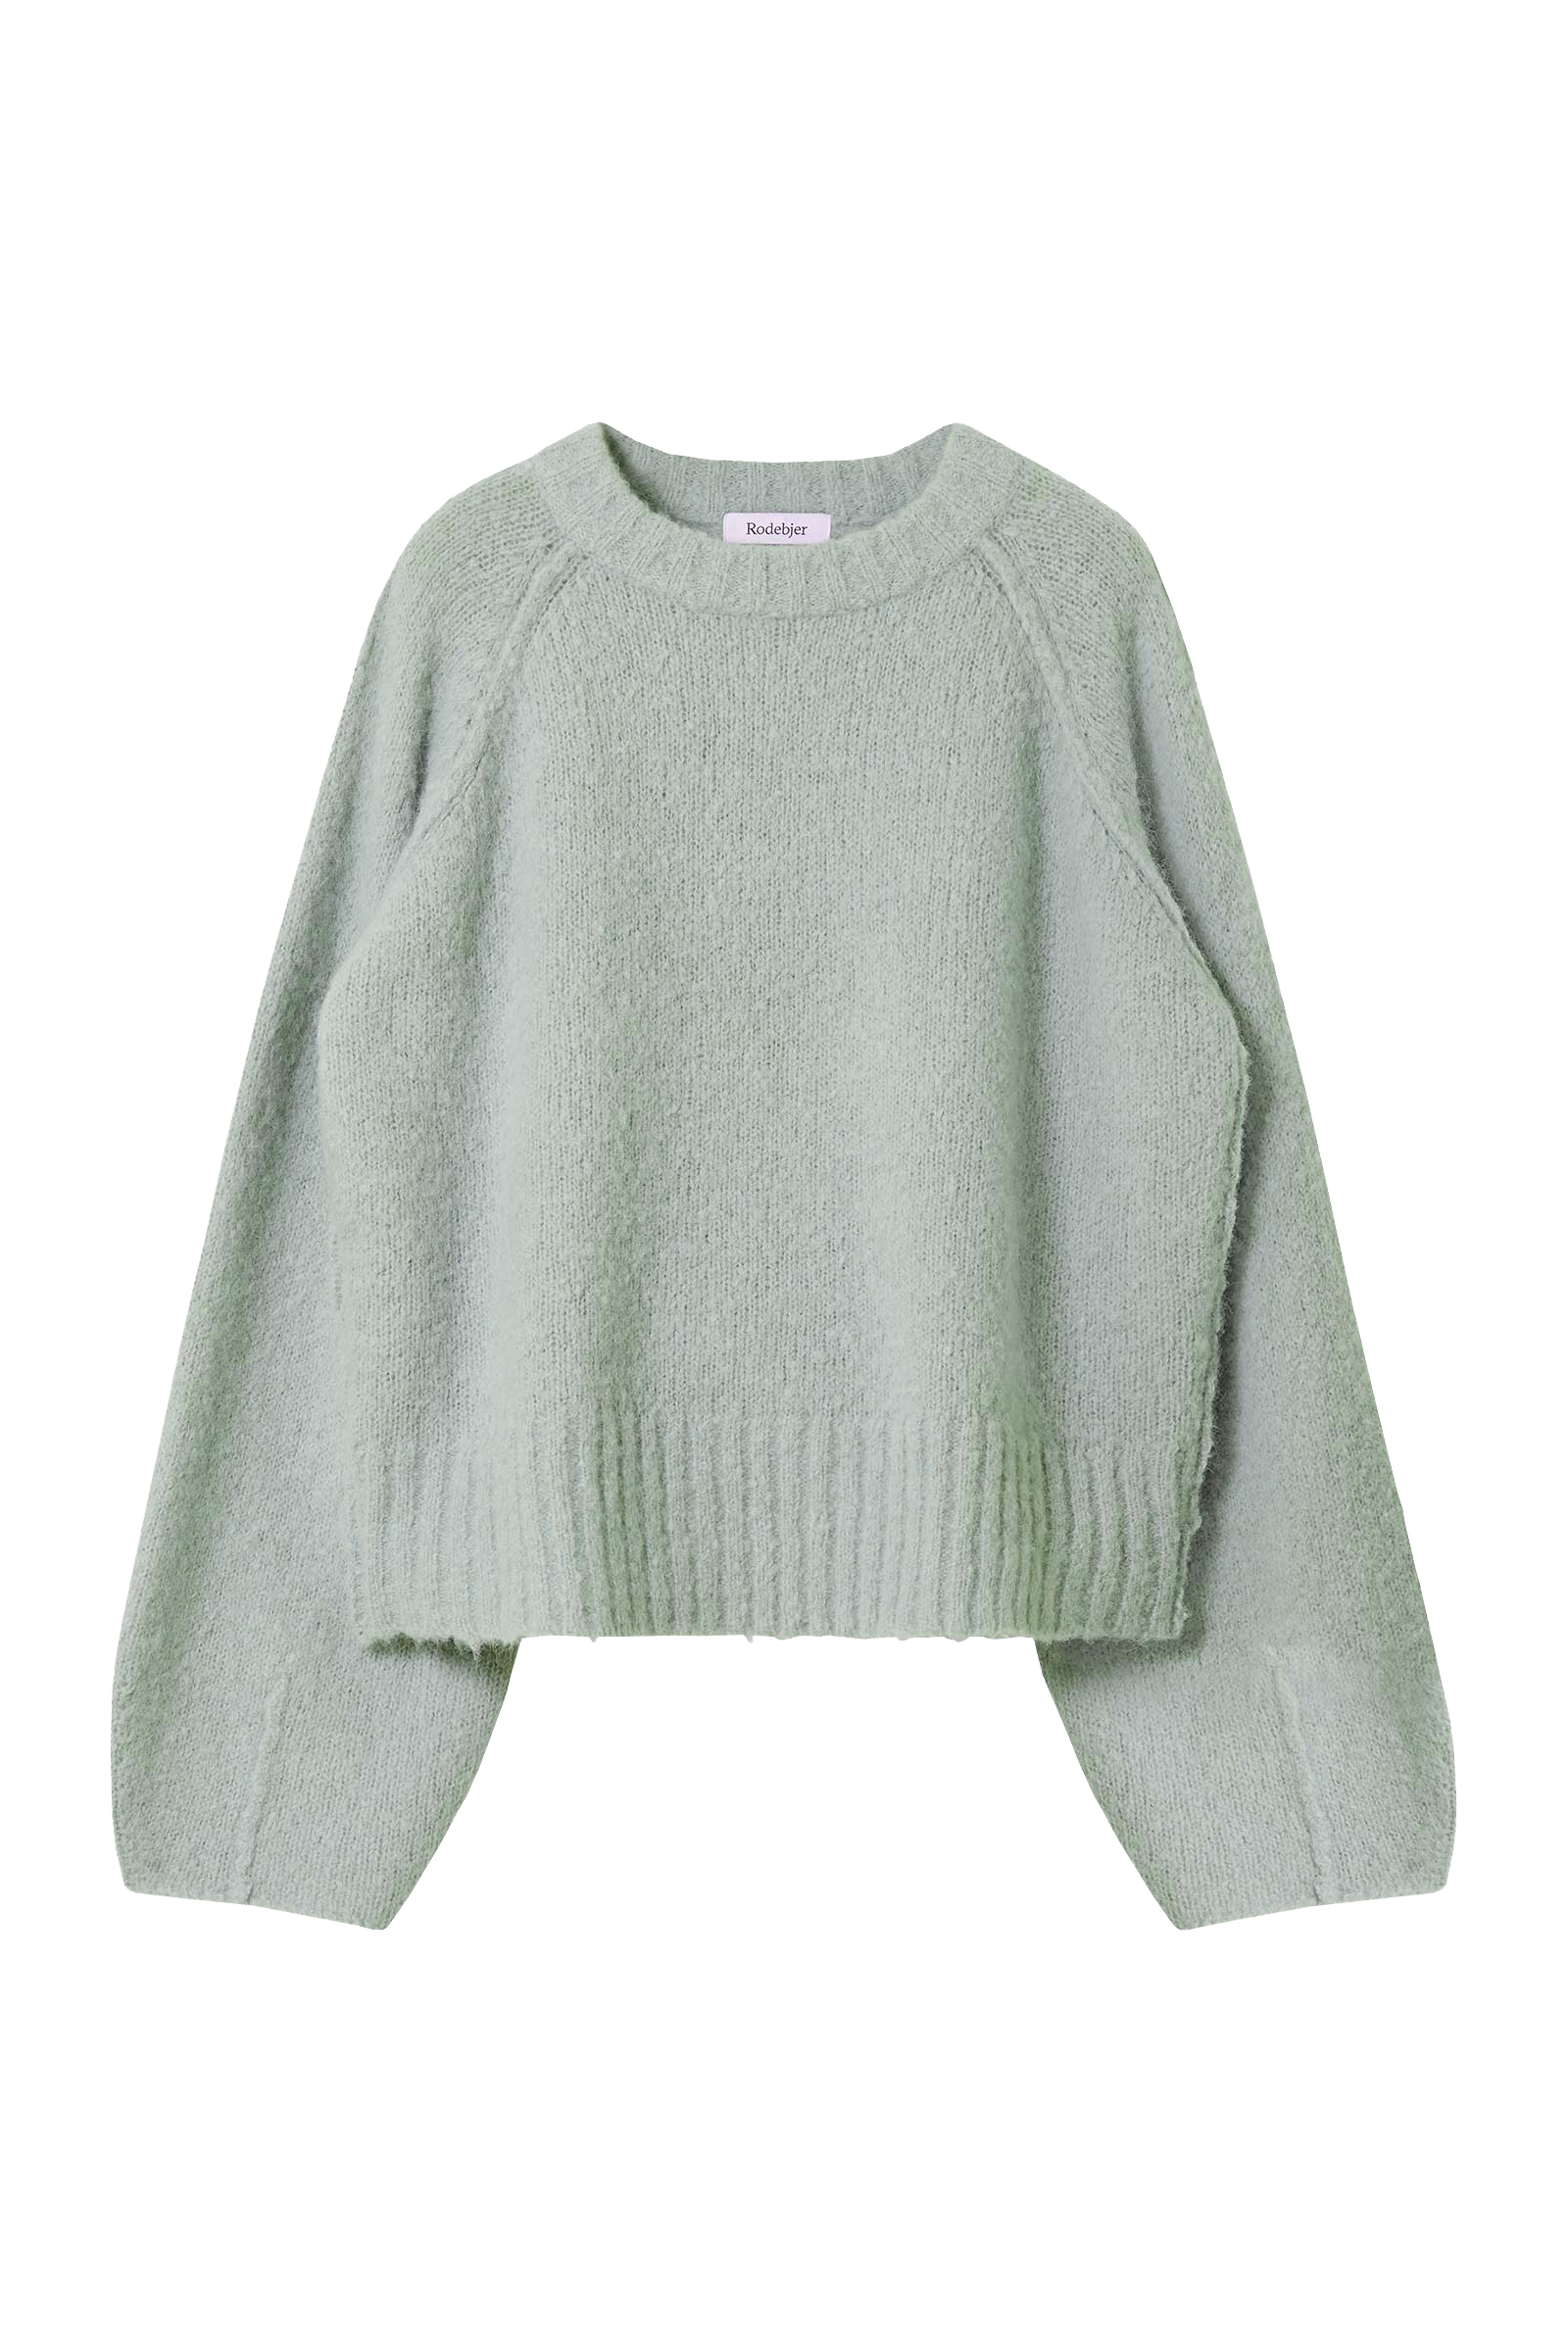 Rodebjer Francisca Knitted Sweater